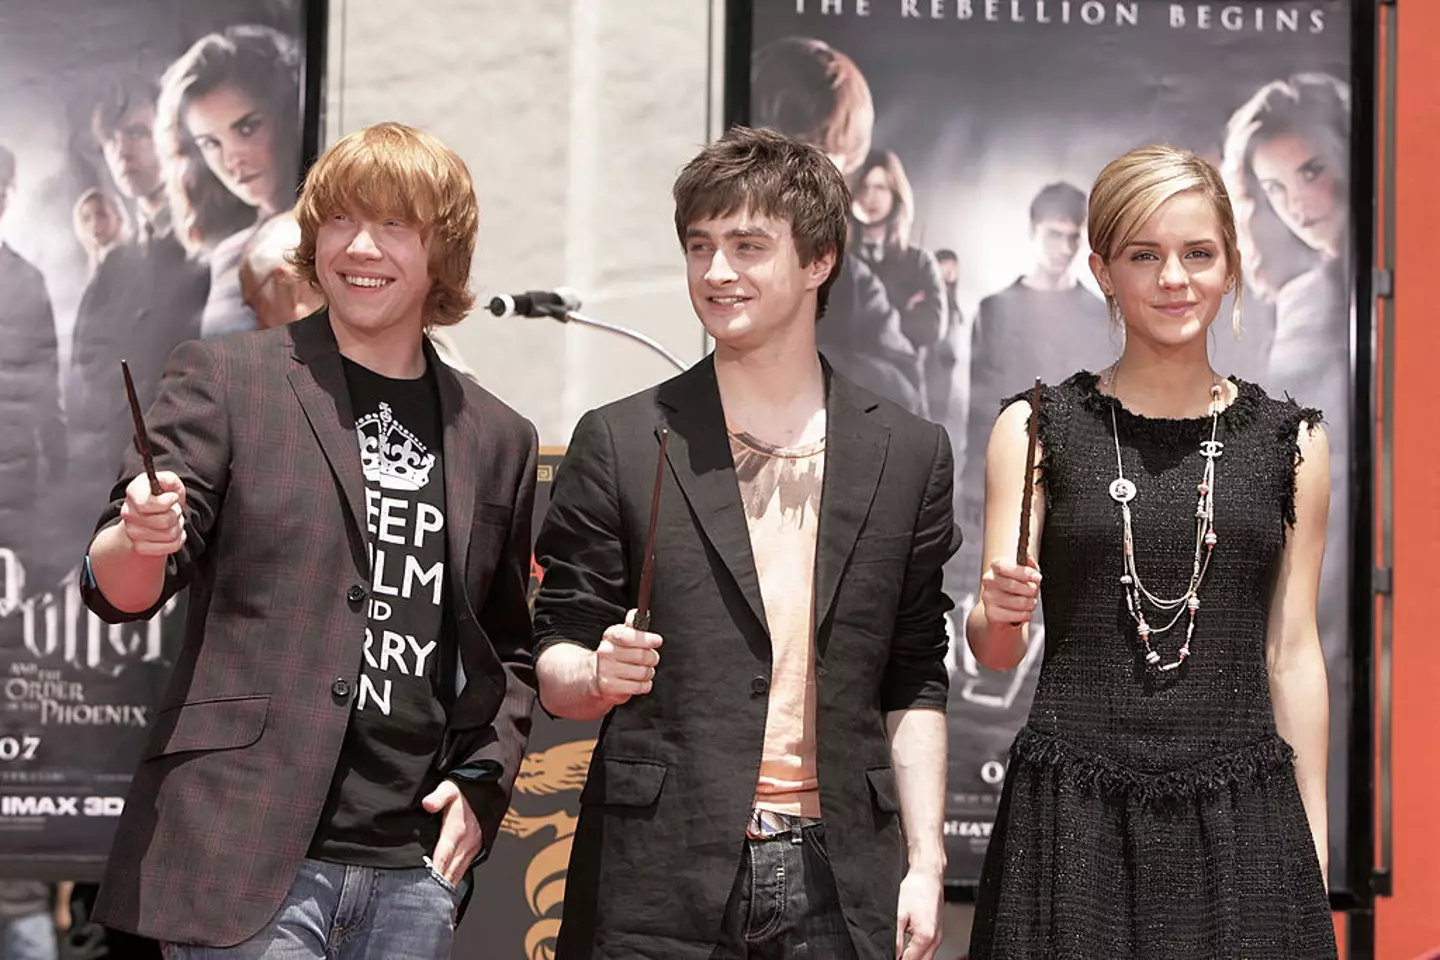 JK Rowling has told the Harry Potter cast to 'save their apologies' if for some reason they wanted to bury the hatchet with her. (Eric Charbonneau/WireImage)